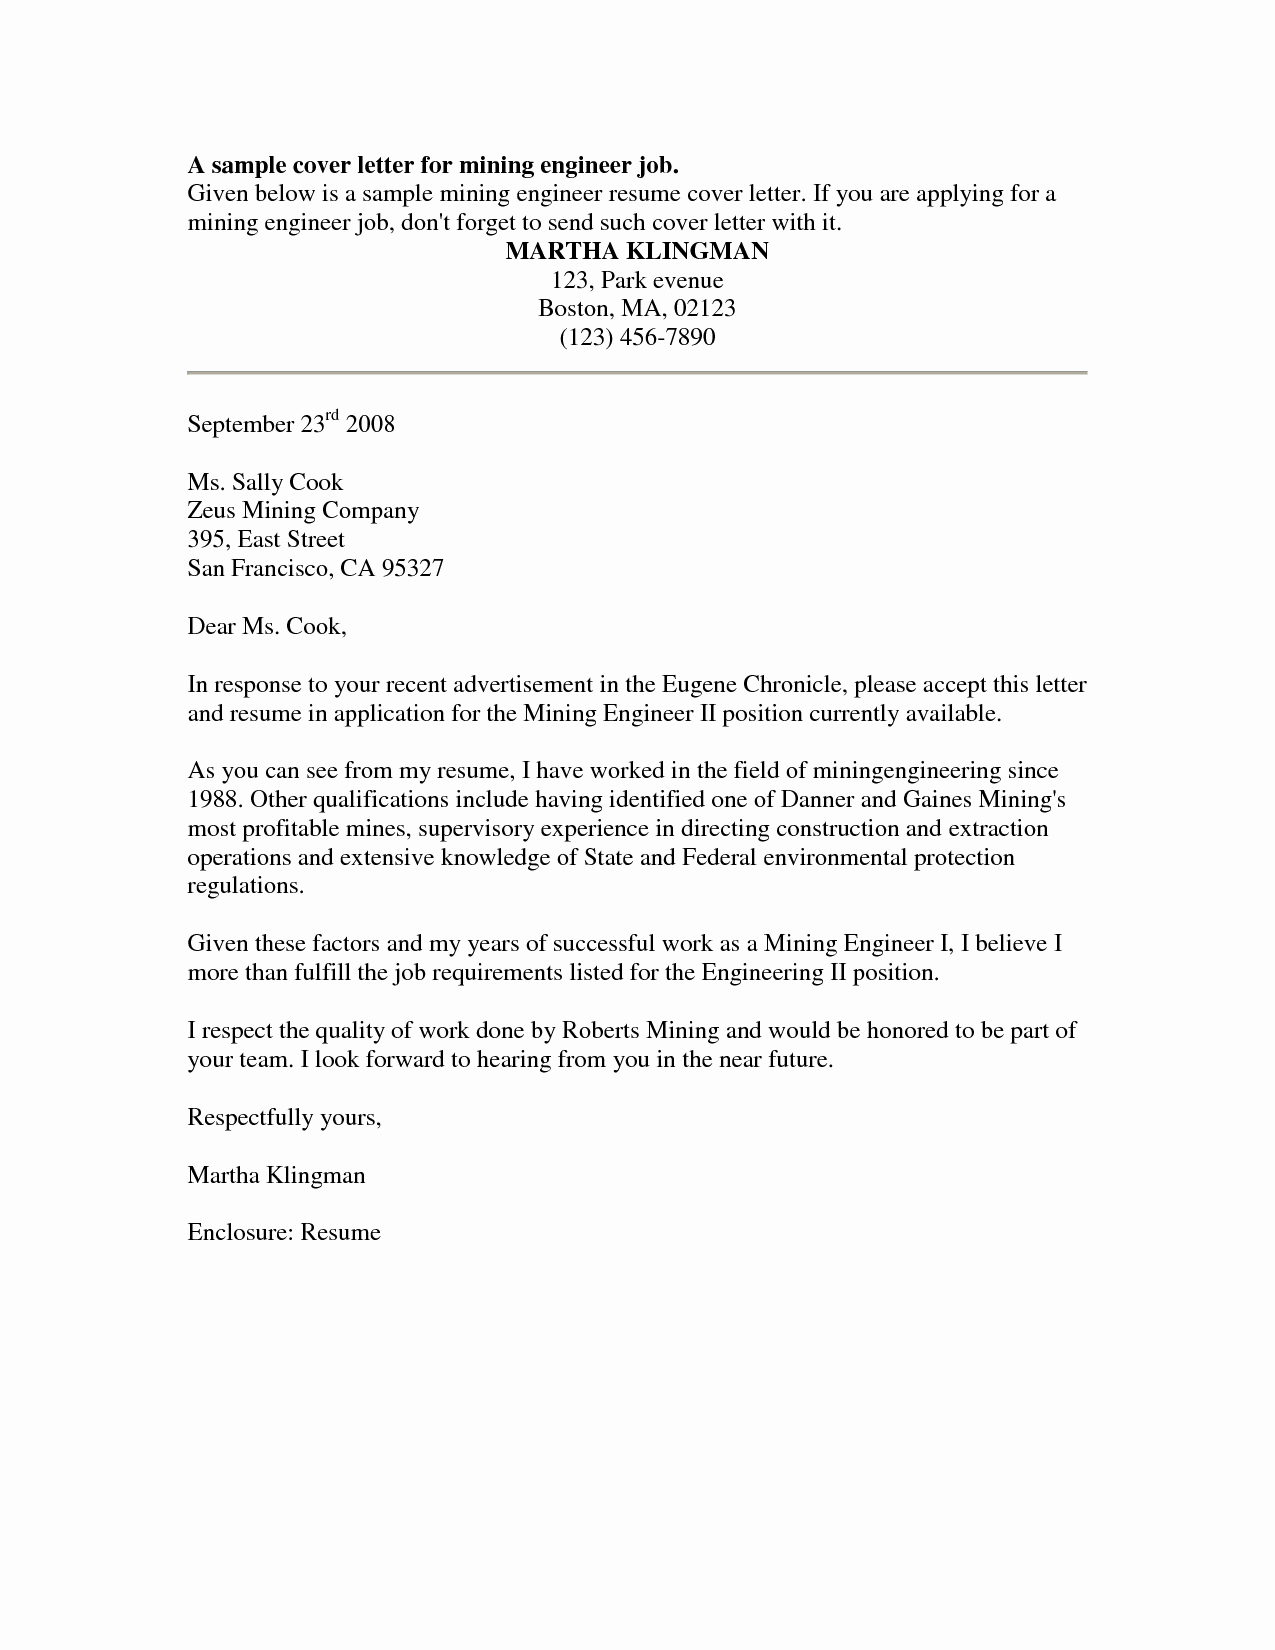 Sample Business Cover Letters Unique Cover Letter Sample Free Sample Job Cover Letter for